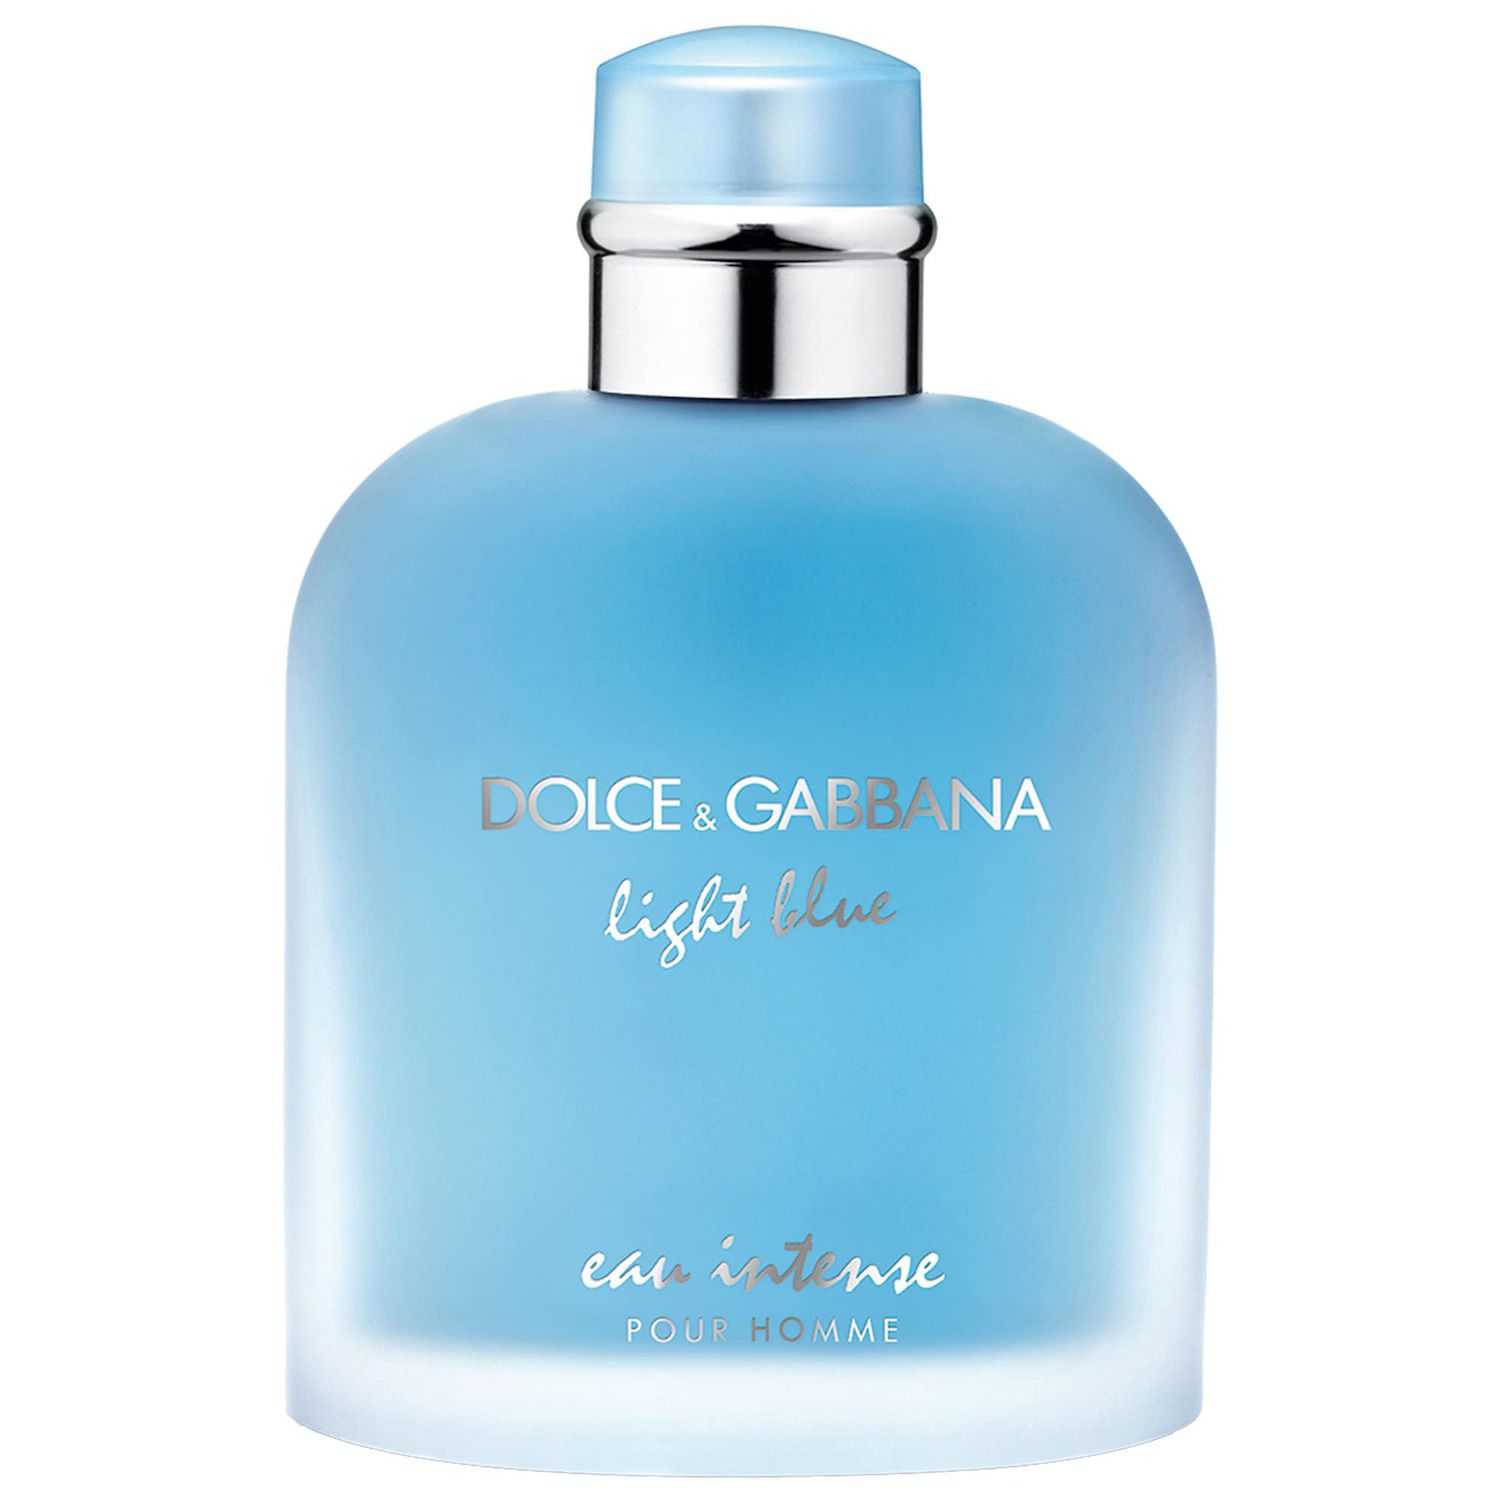 dolce and gabbana cologne light blue